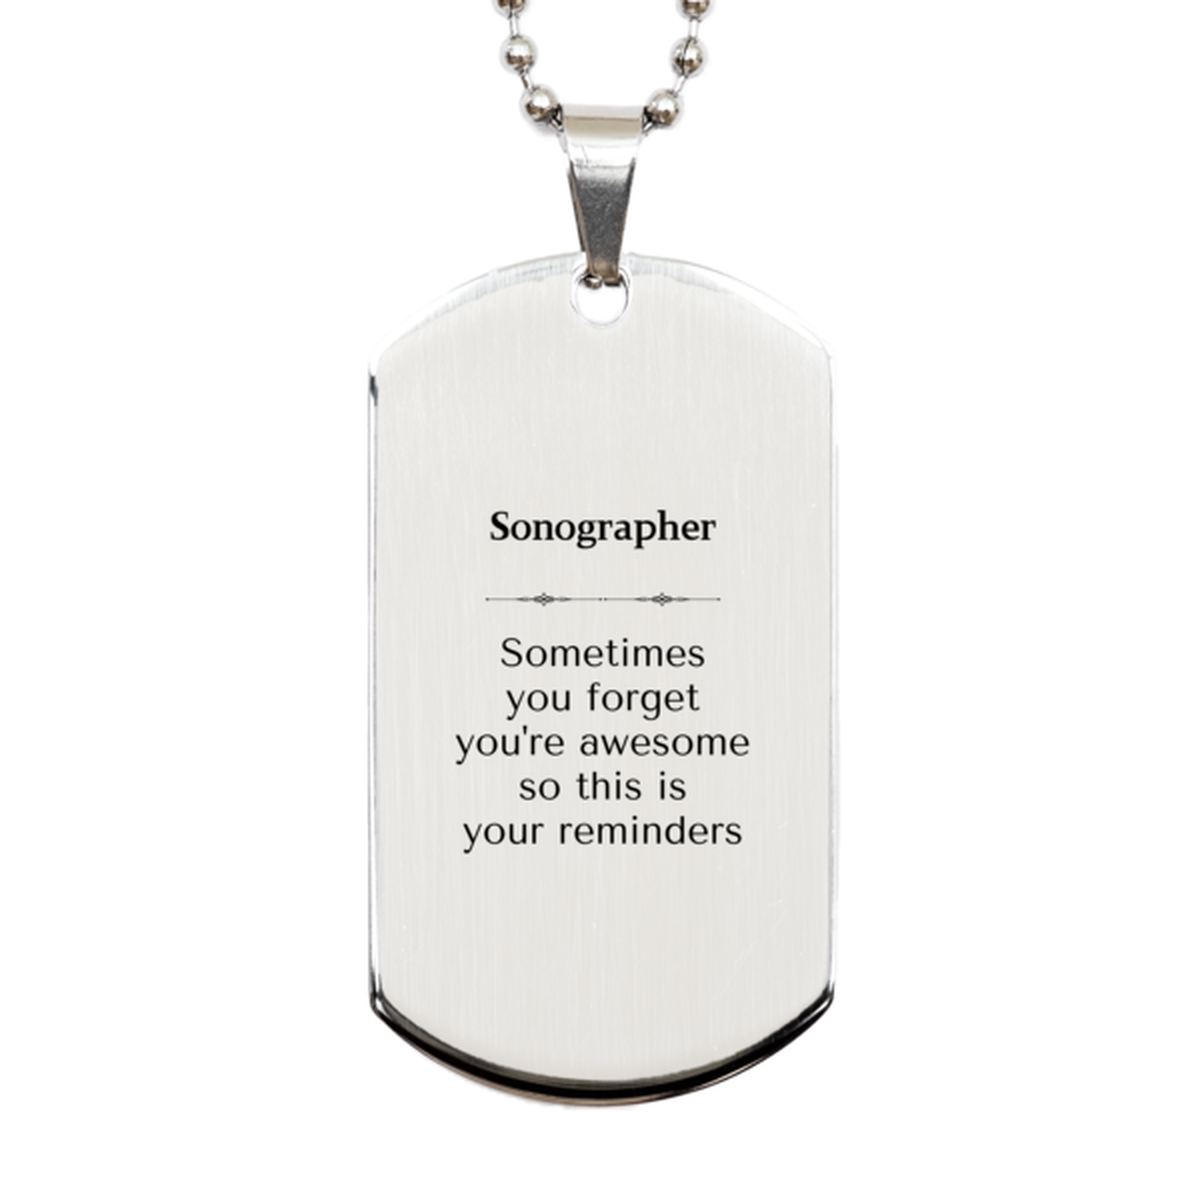 Sentimental Sonographer Silver Dog Tag, Sonographer Sometimes you forget you're awesome so this is your reminders, Graduation Christmas Birthday Gifts for Sonographer, Men, Women, Coworkers